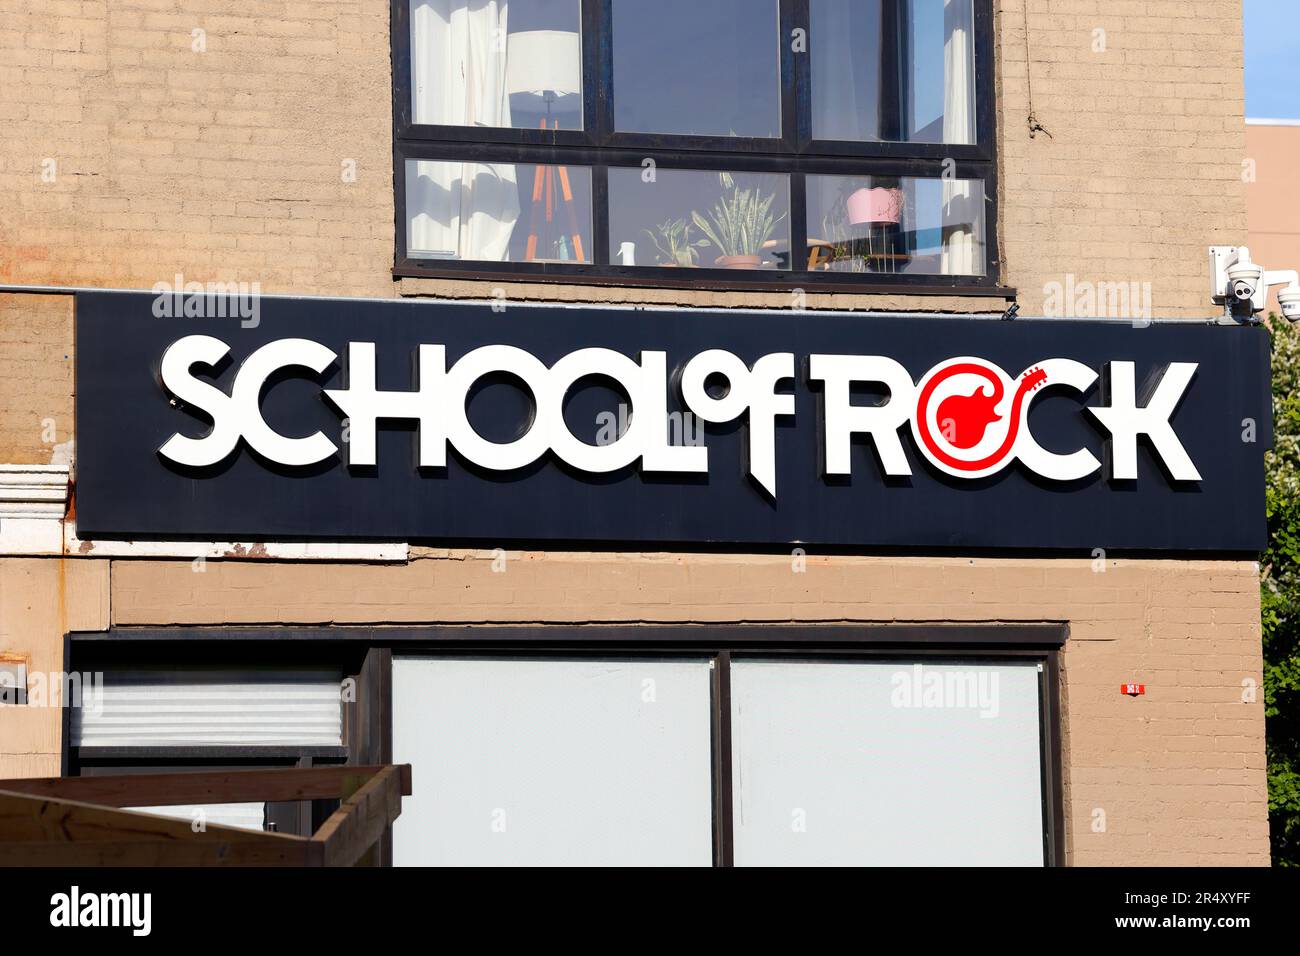 A School of Rock signage at a franchise location in Brooklyn, New York City. the School of Rock is an all ages music program. Stock Photo